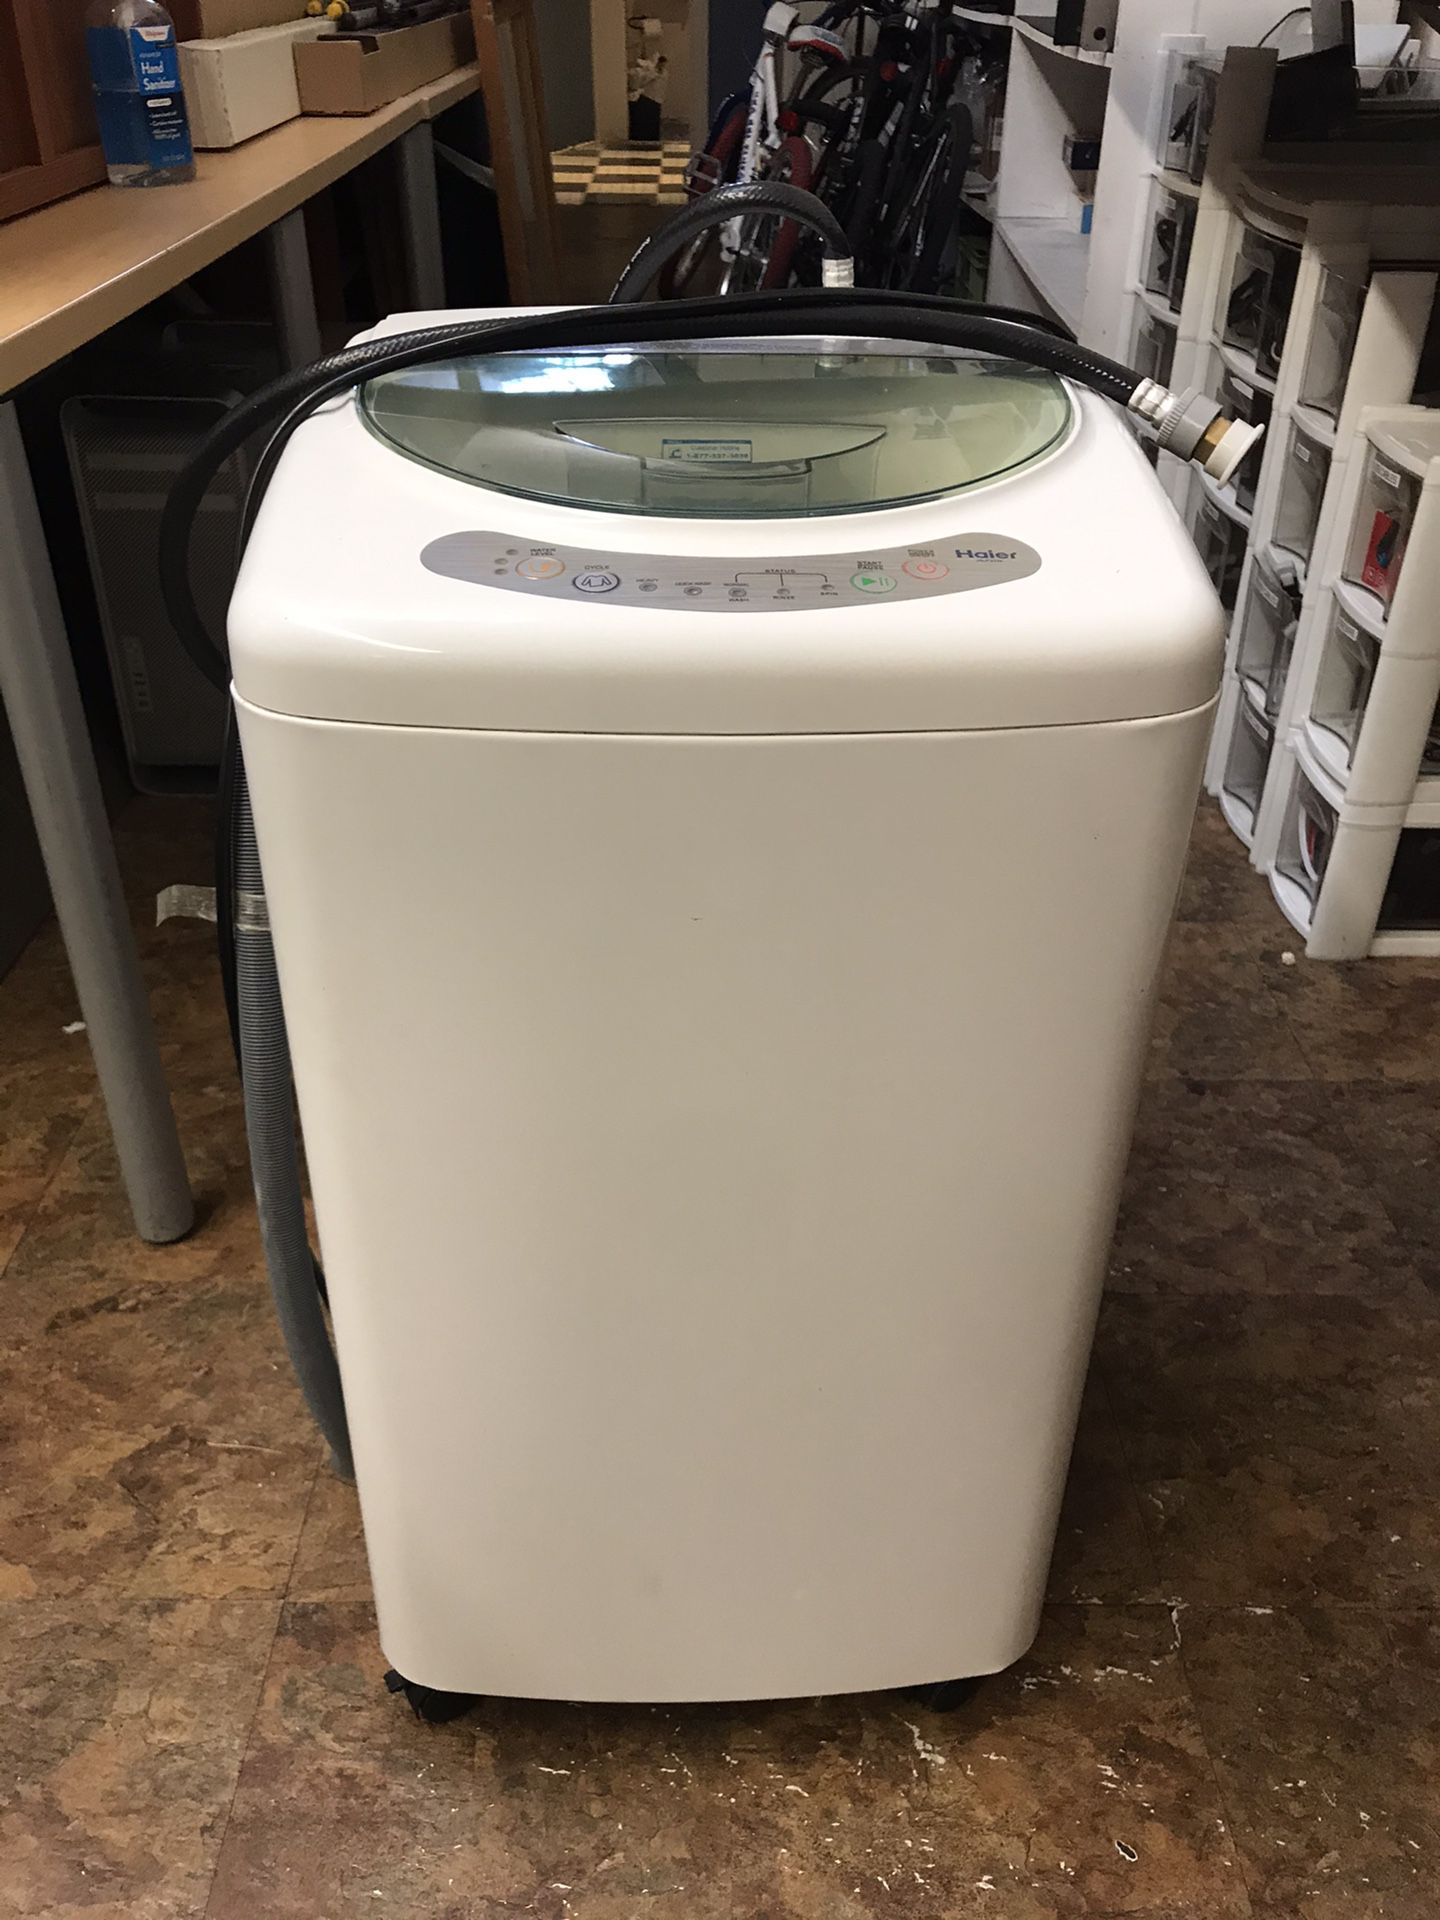 Haier HLP21N Portable Washing Machine - Great condition